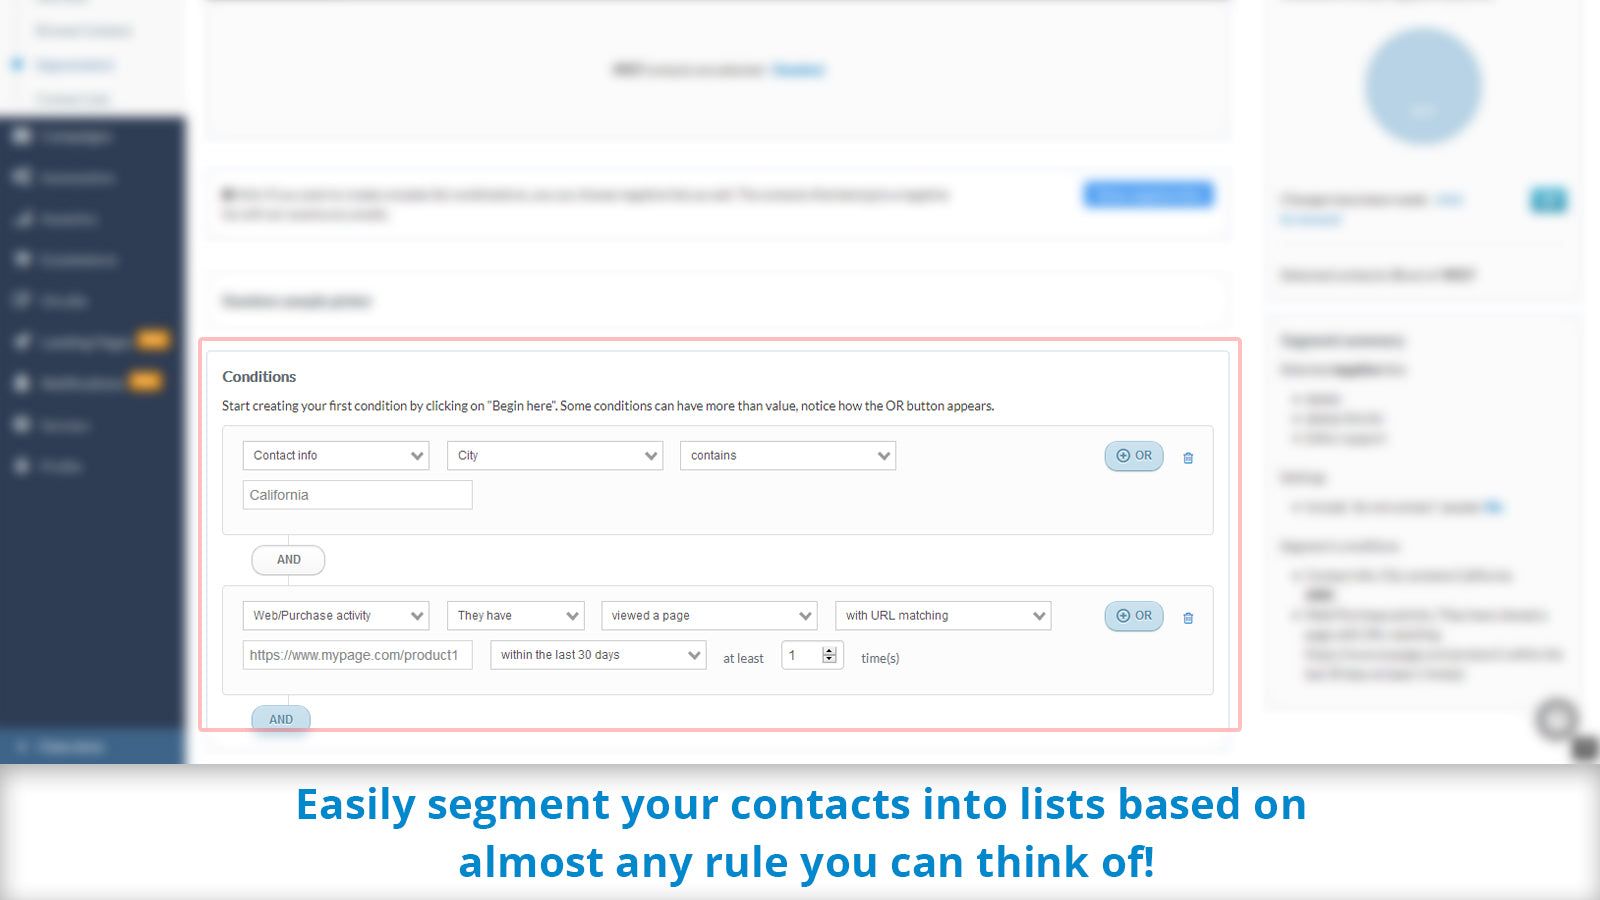 Easily segment your contacts into smart lists